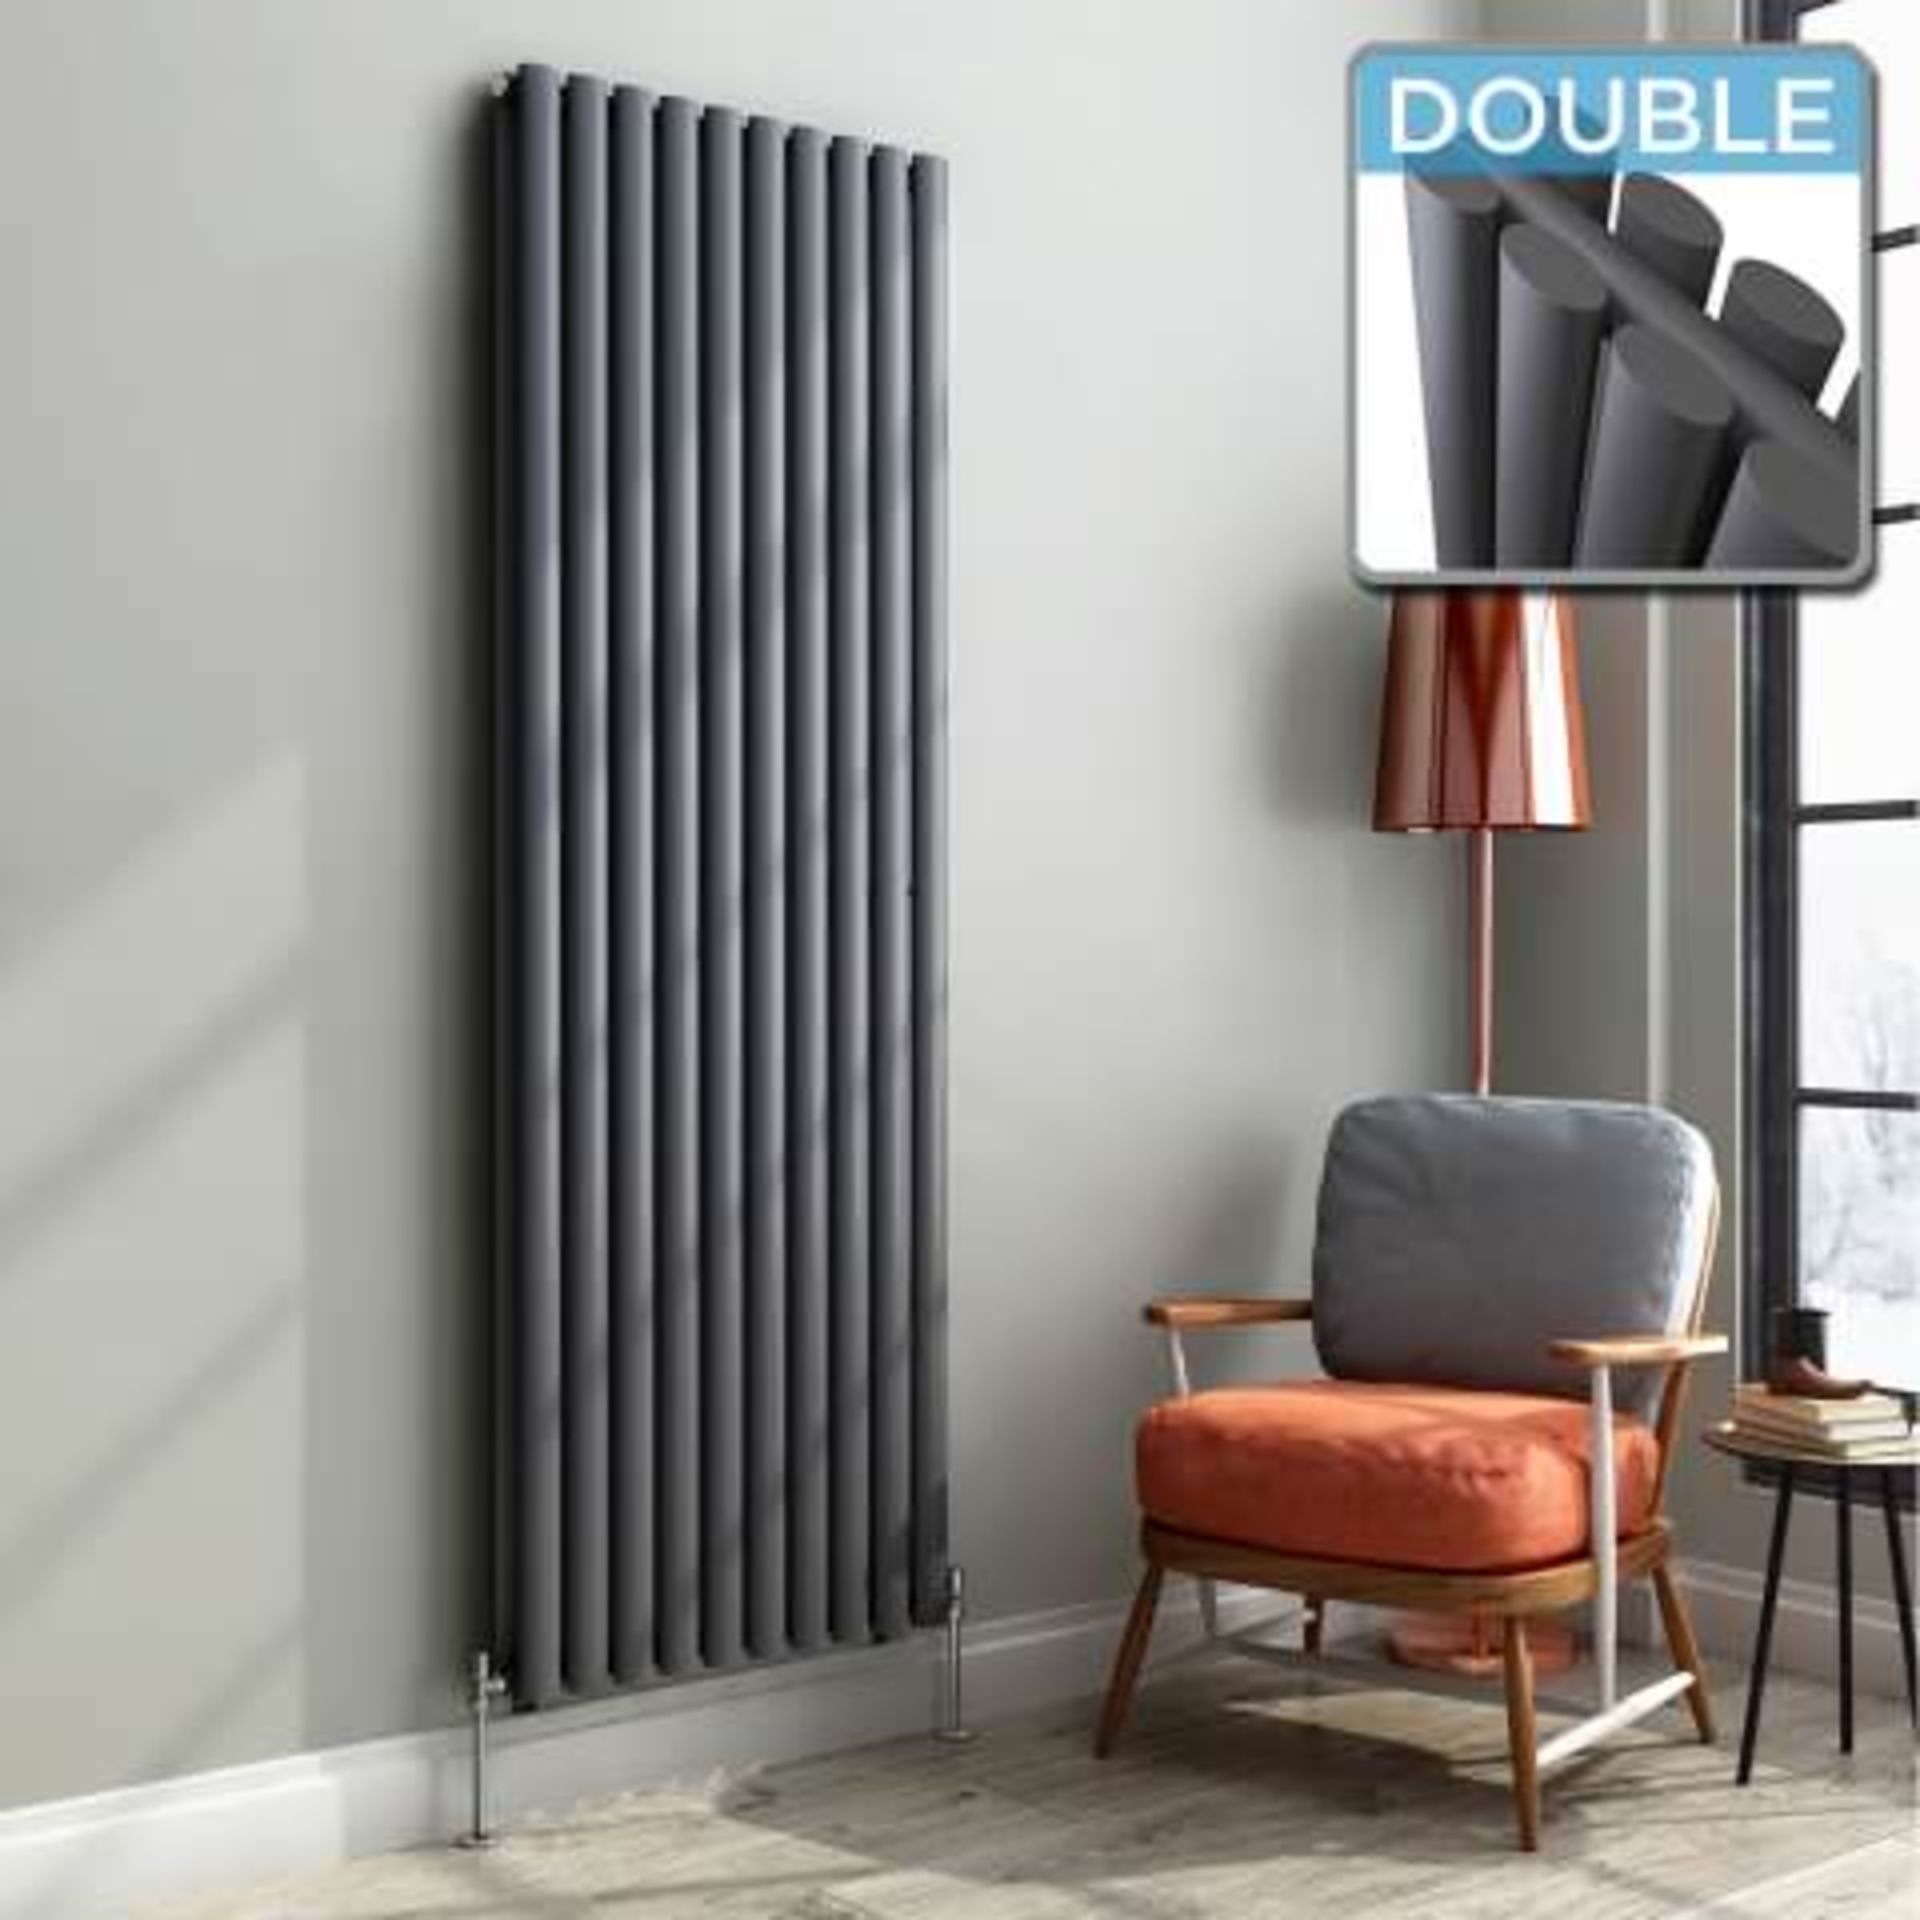 (AA5) 1800x600m Anthracite Double Panel Oval Tube Vertical Radiator - Ember Premium. RRP £599.99. - Image 2 of 4